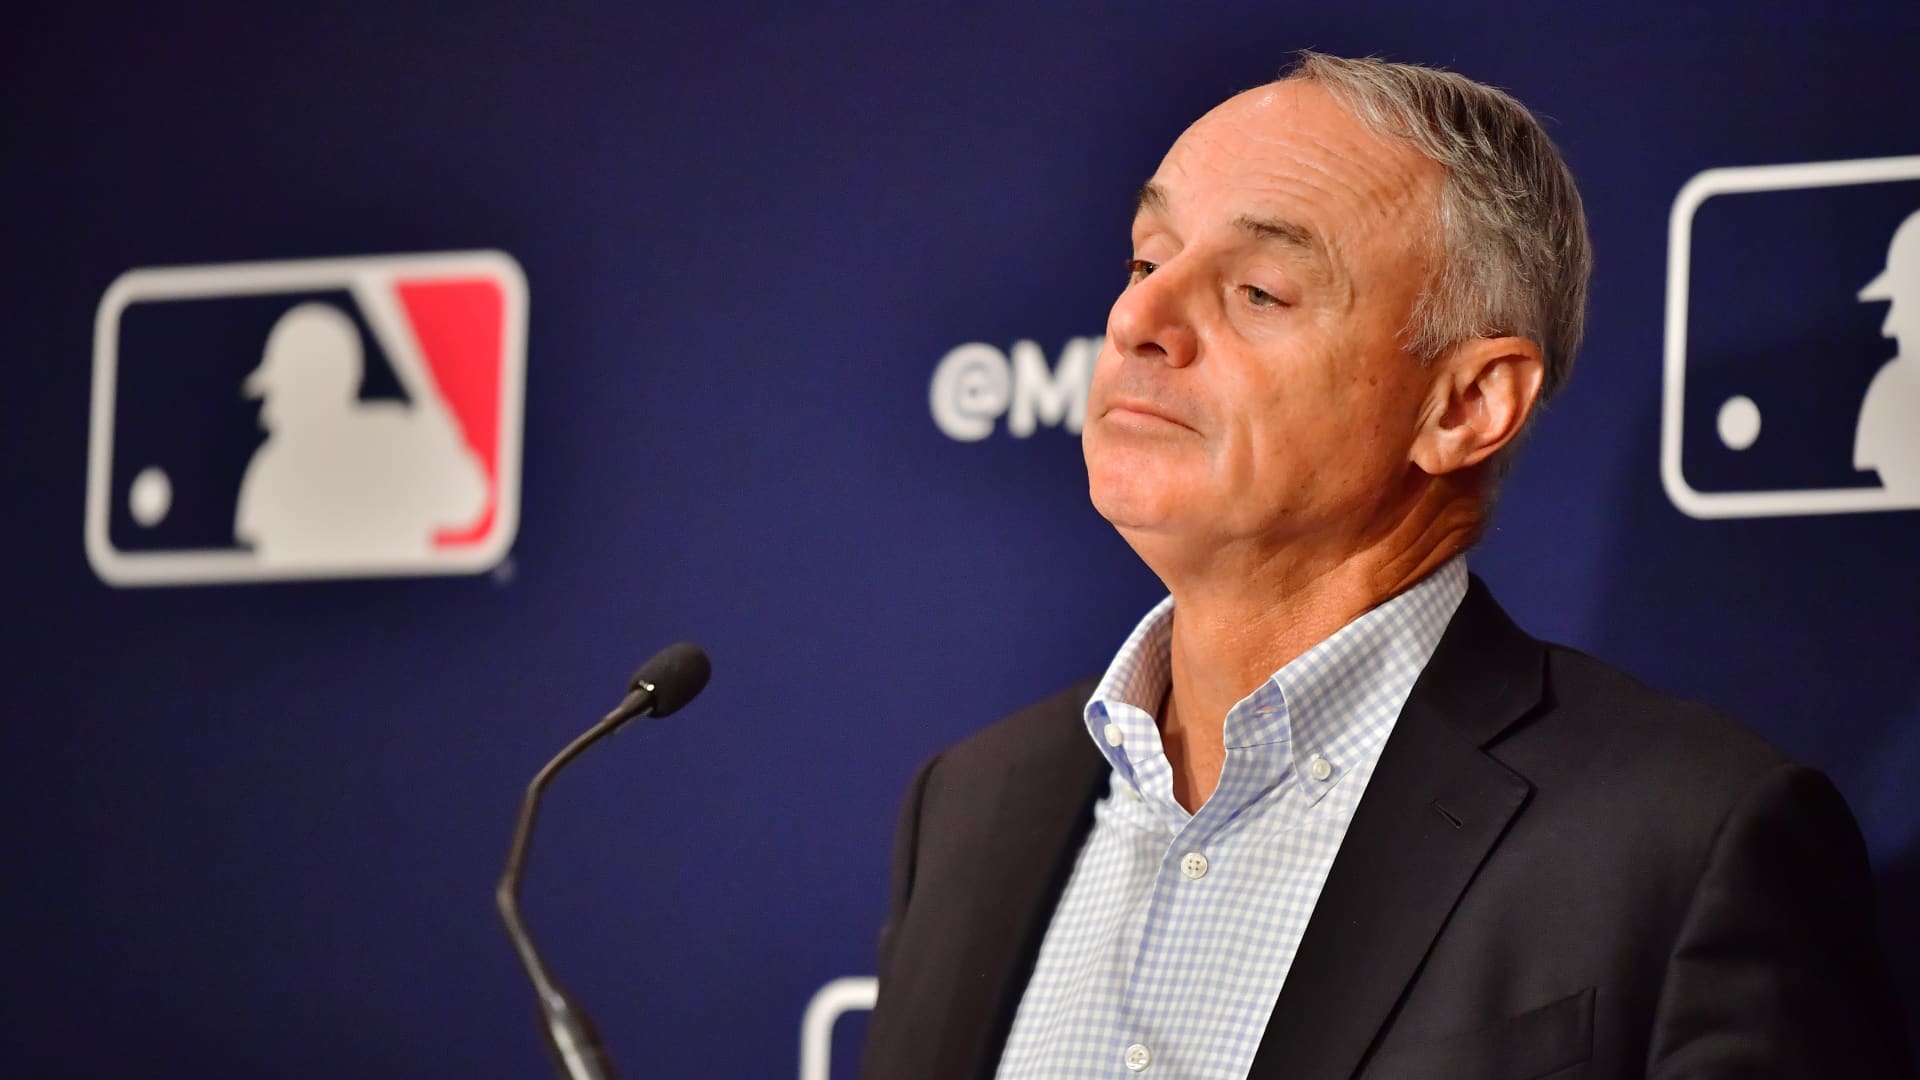 Major League Baseball Commissioner Rob Manfred answers questions during an MLB owner's meeting at the Waldorf Astoria on February 10, 2022 in Orlando, Florida. Manfred addressed the ongoing lockout of players, which owners put in place after the league's collective bargaining agreement ended on December 1, 2021.